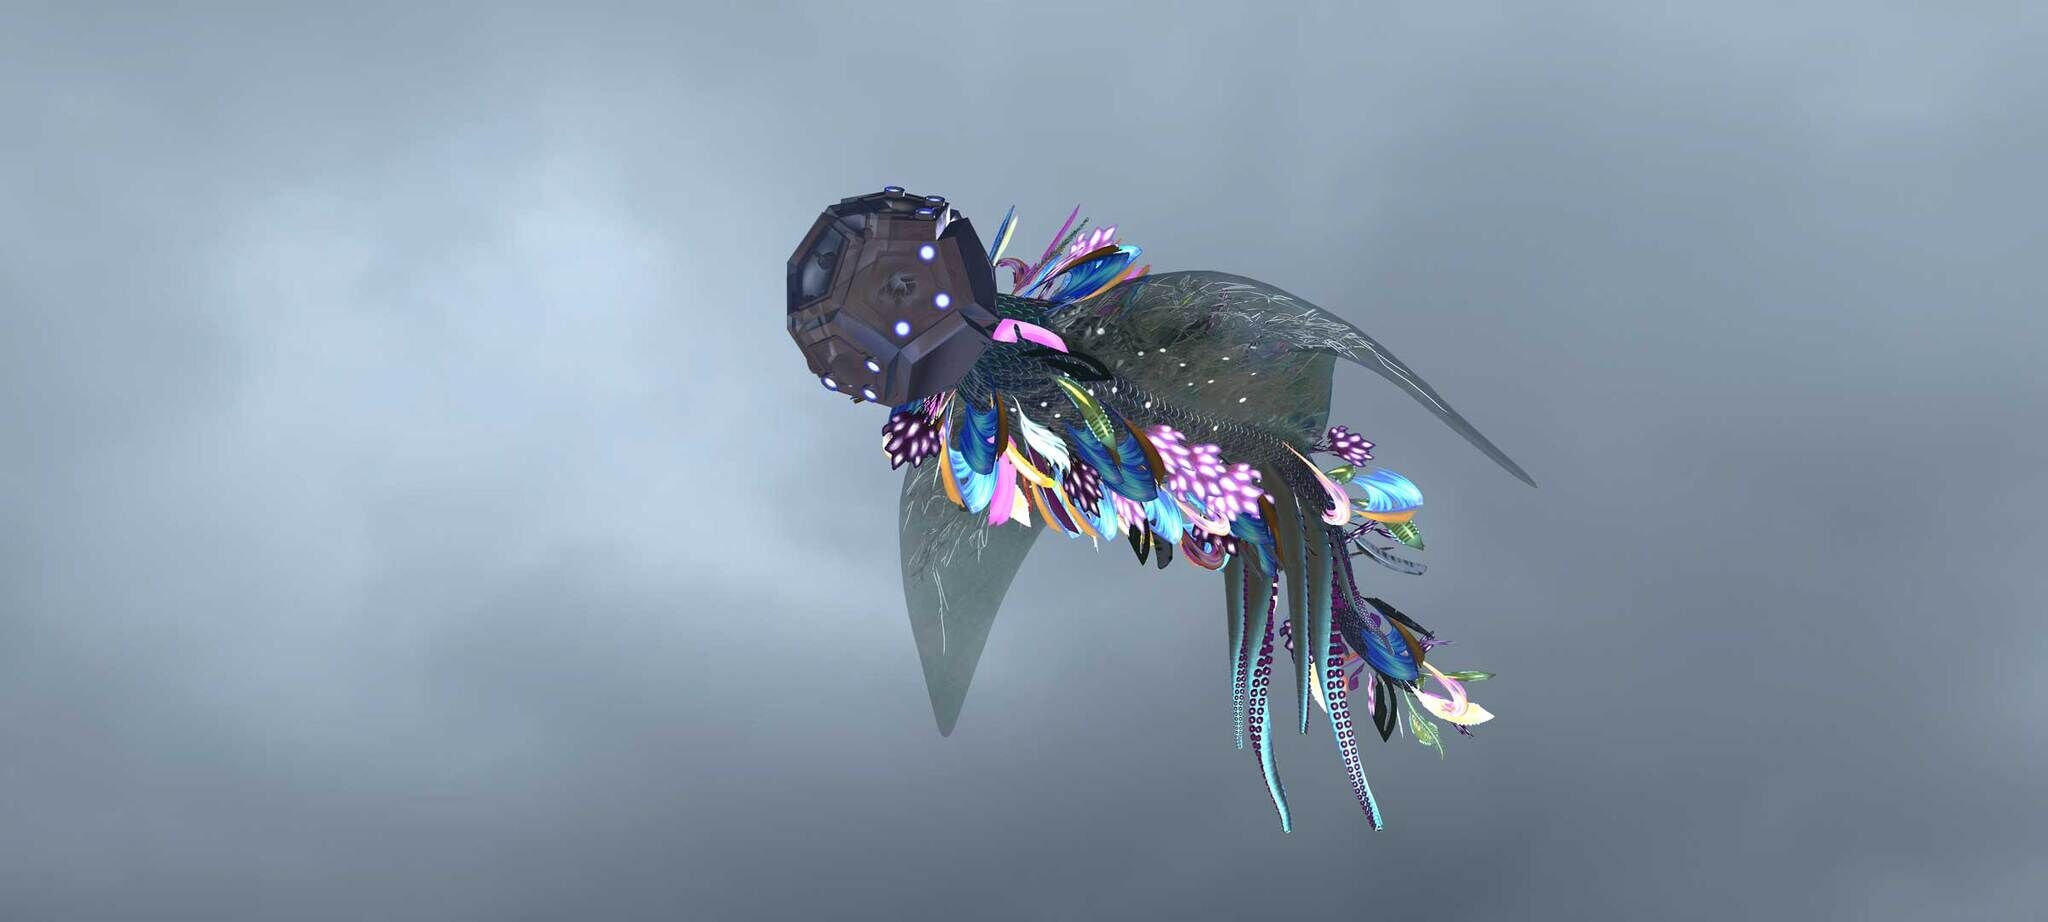 A 3D rendered creature with trailing tentacles, wings, and feathers, floats in the cloudy sky.